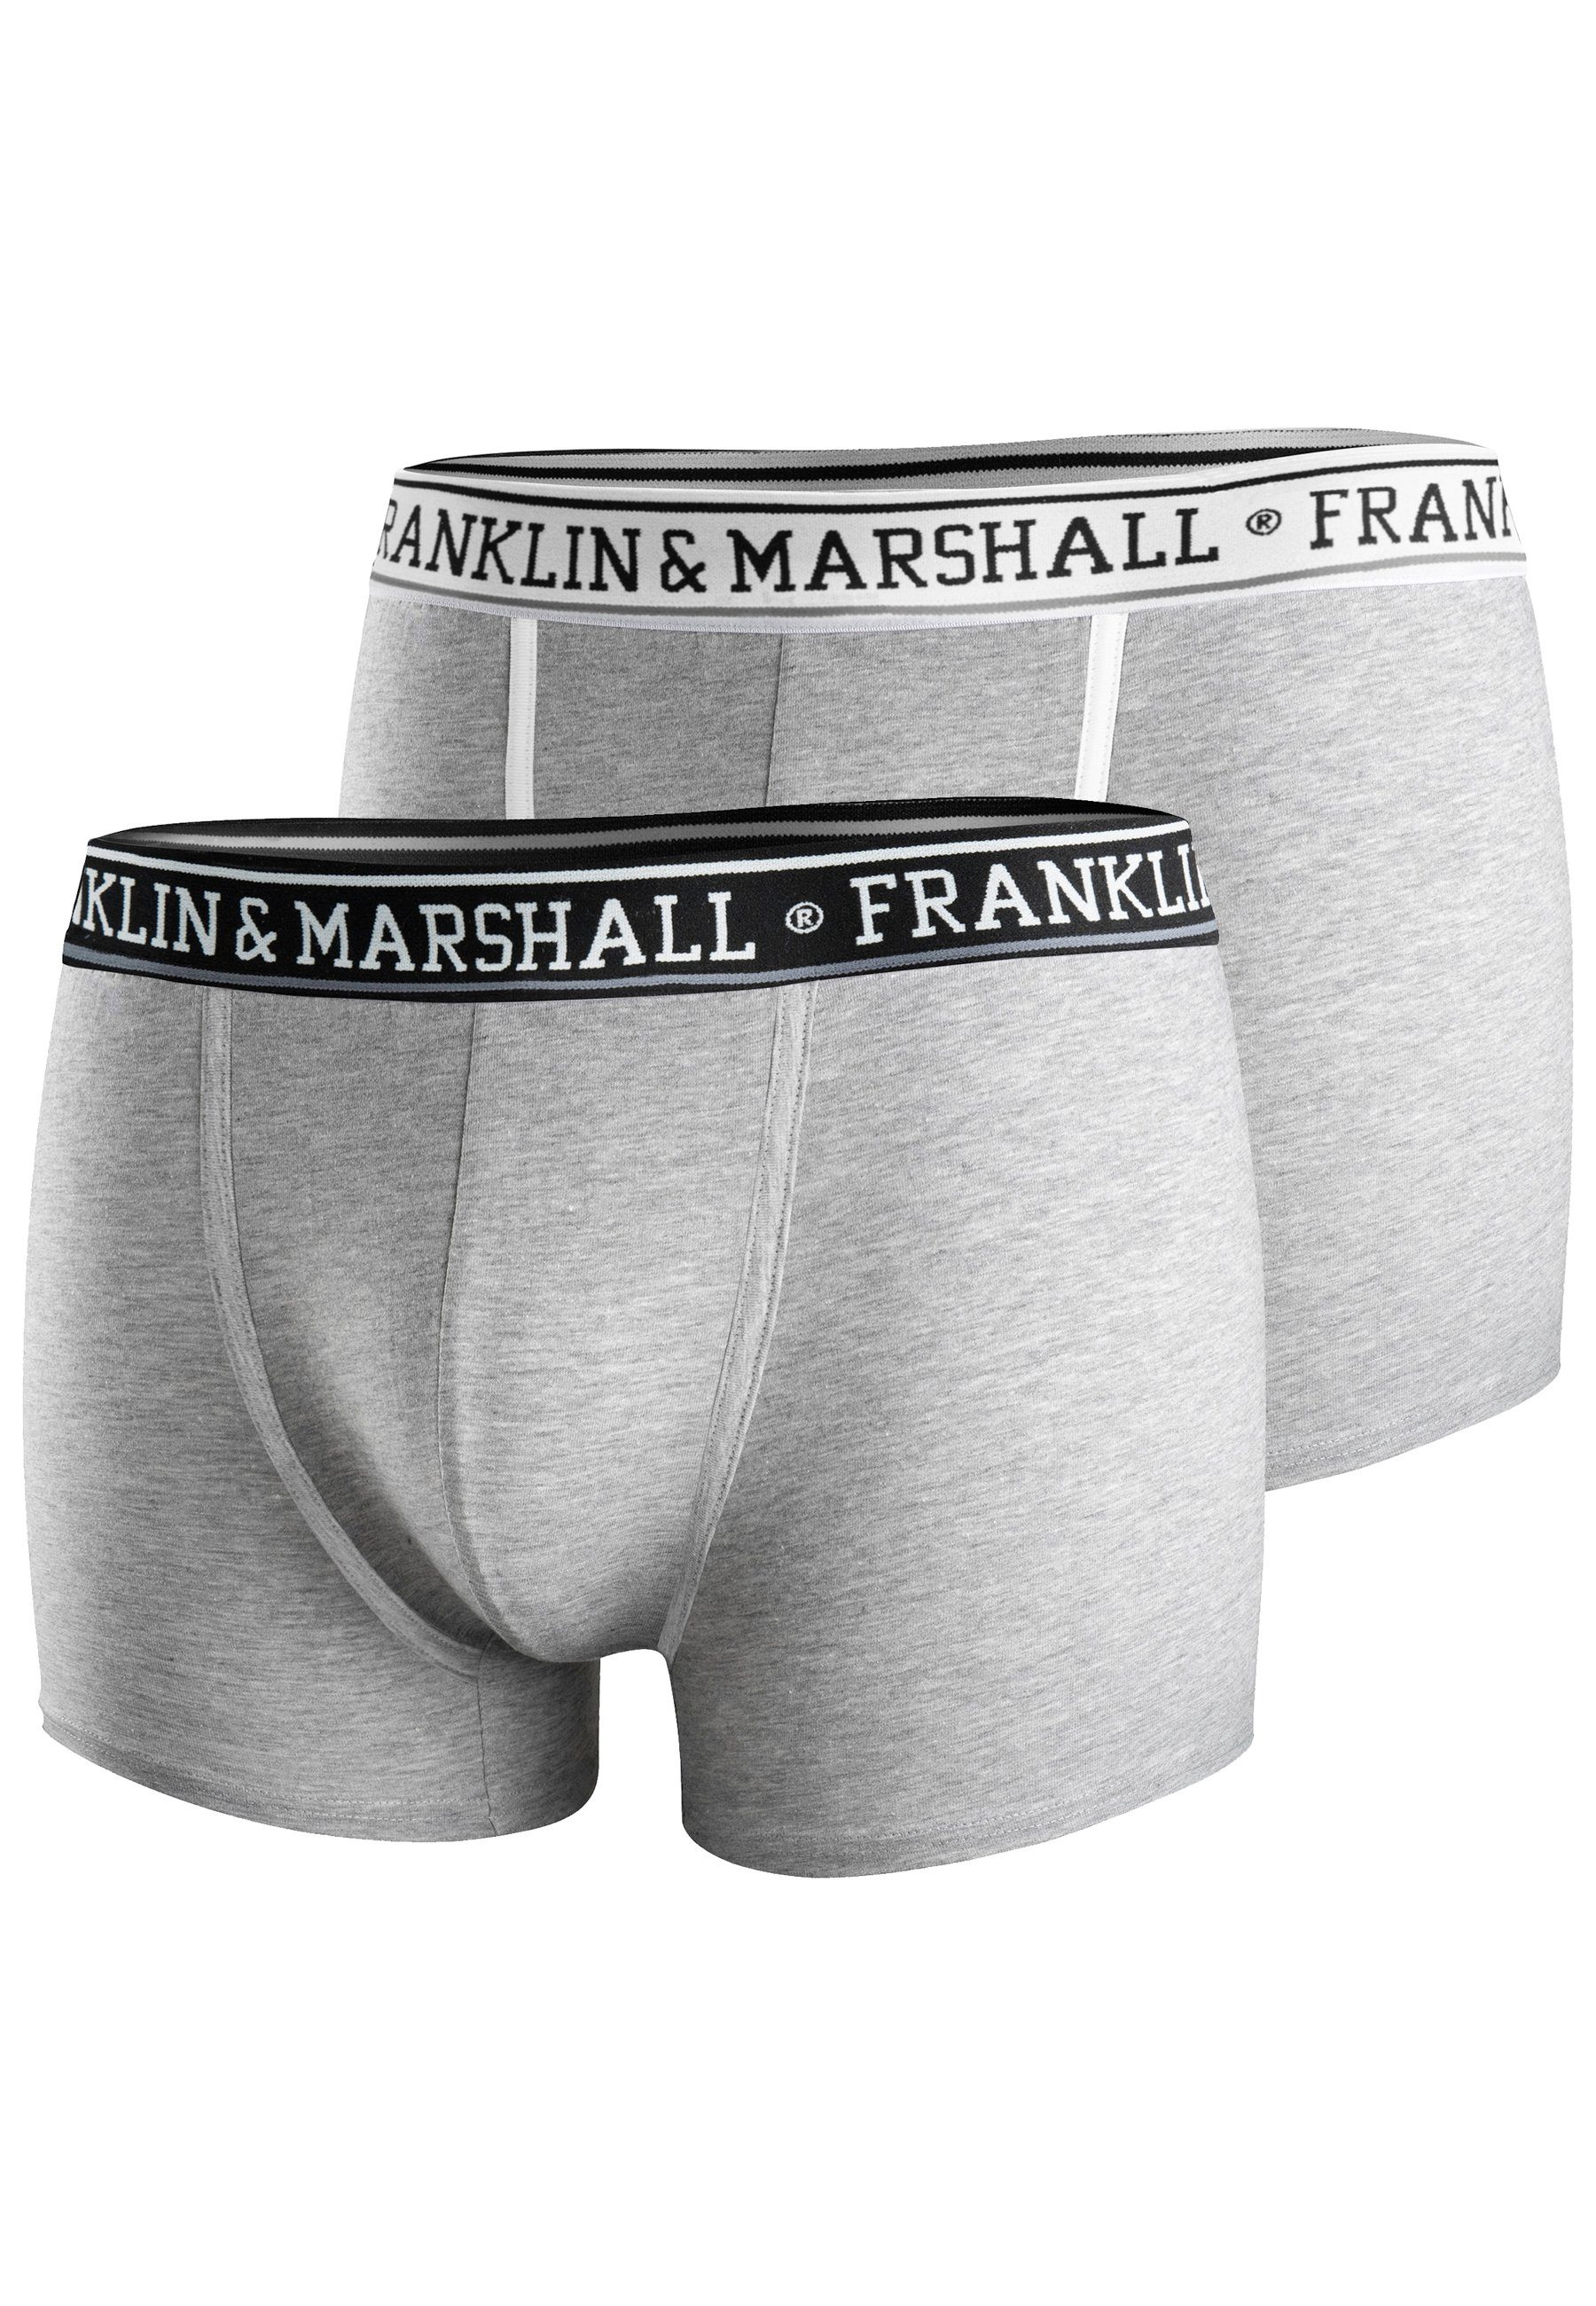 FRANKLIN AND MARSHALL Boxershorts Hellgrau Northern Point (1-St)